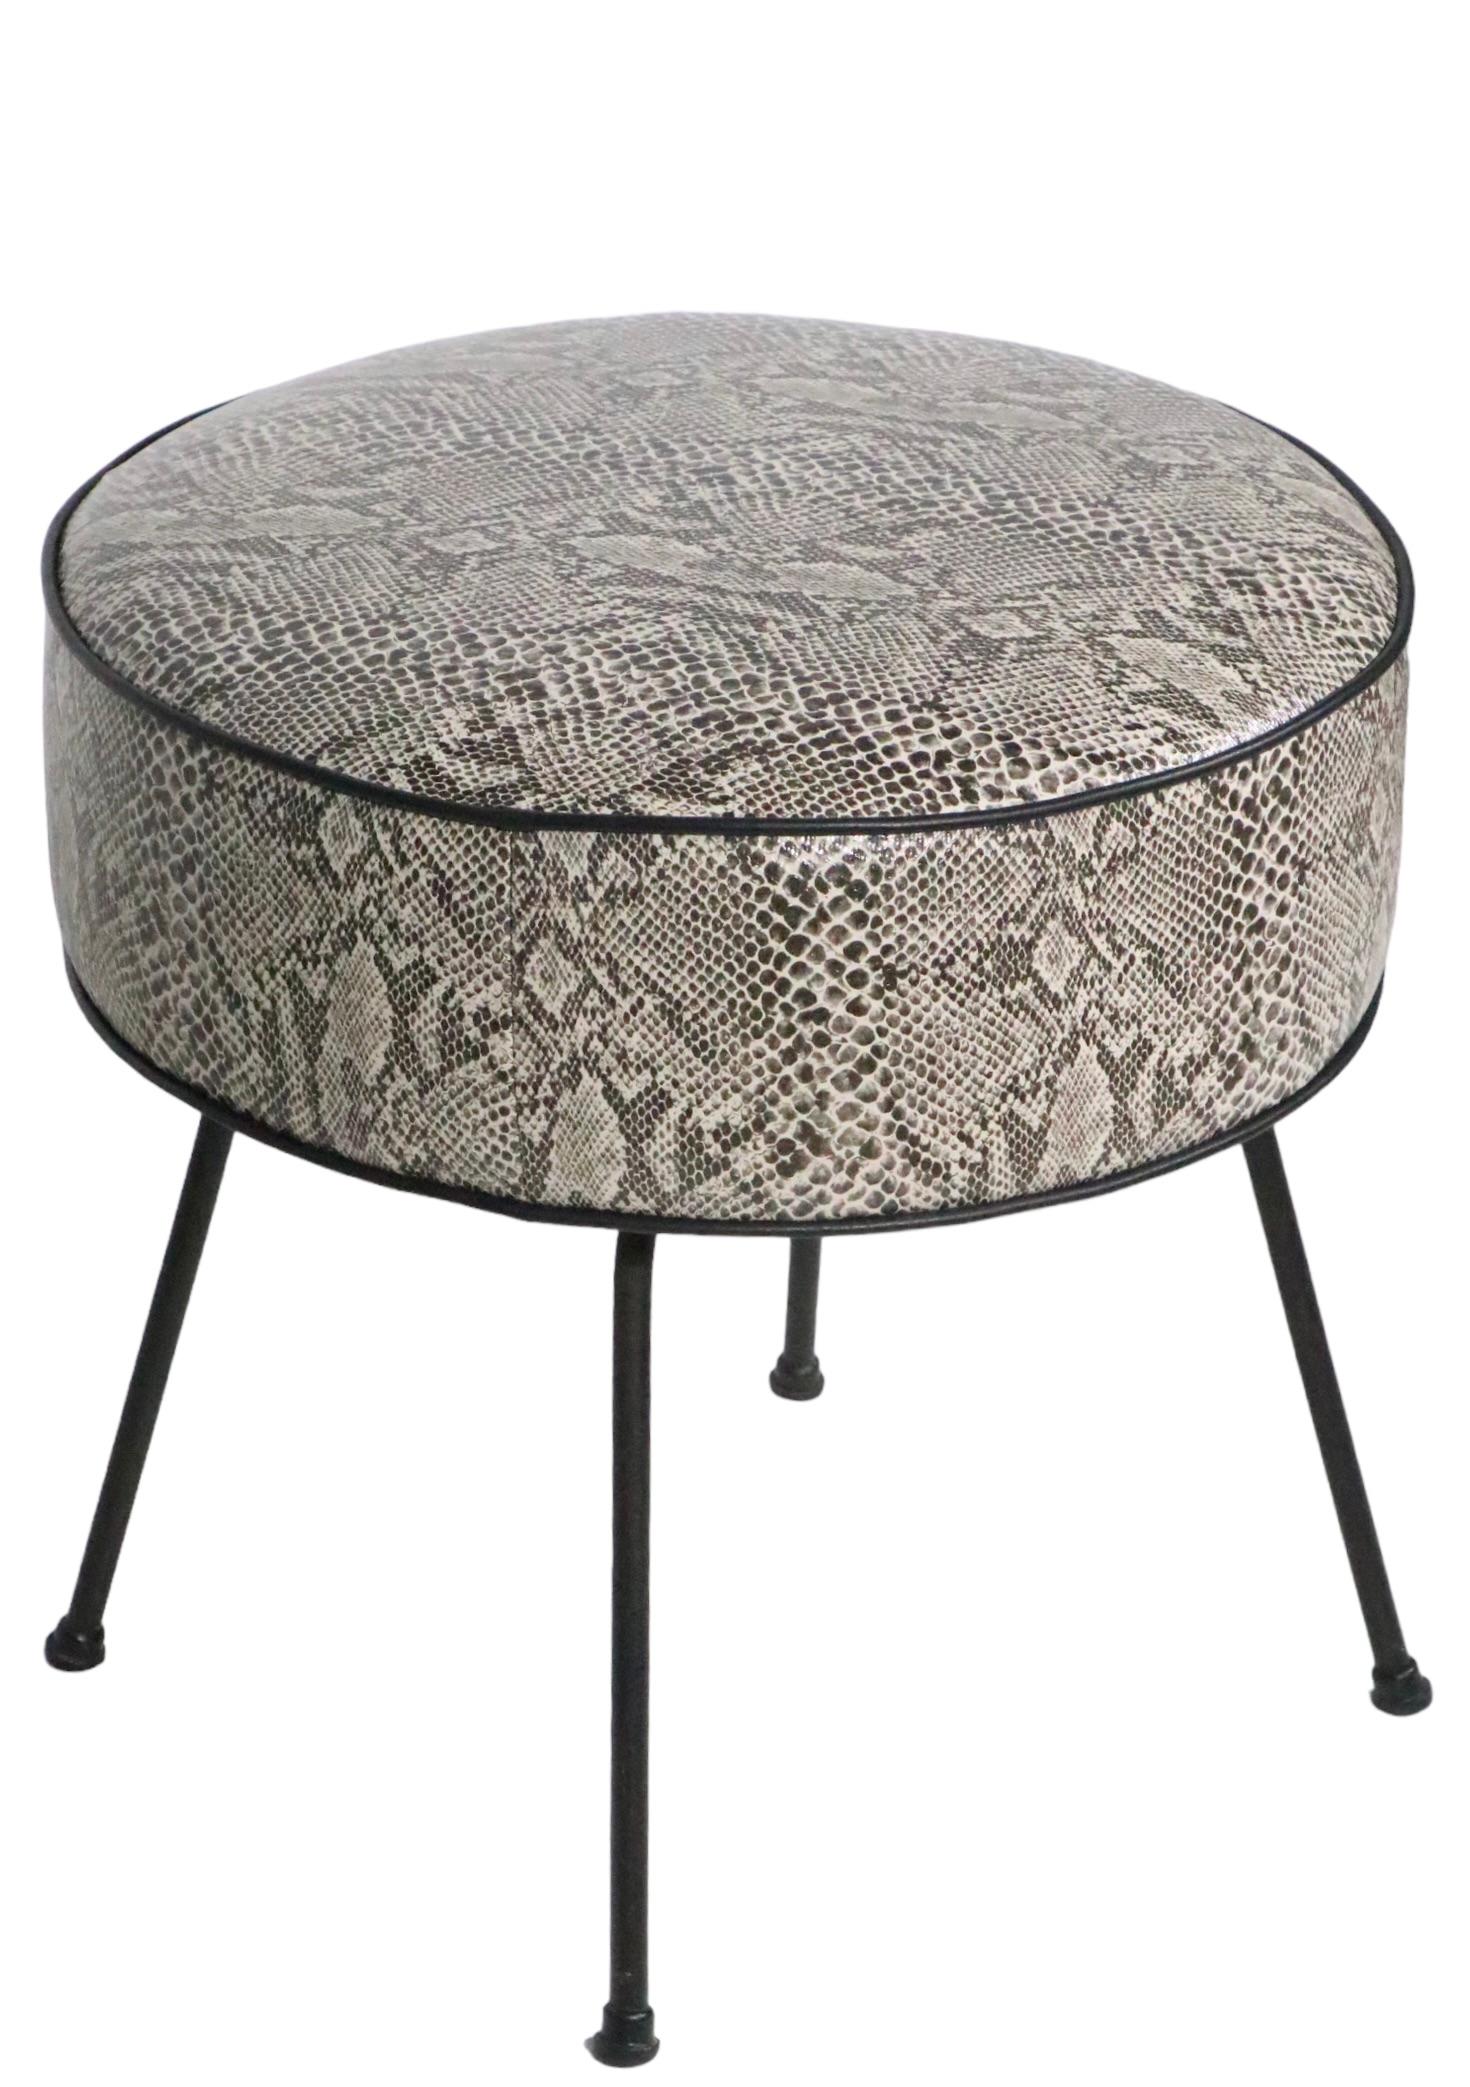 20th Century Mid Century Foot Stool Pouf Ottoman Reupholstered in Black and White Faux Python